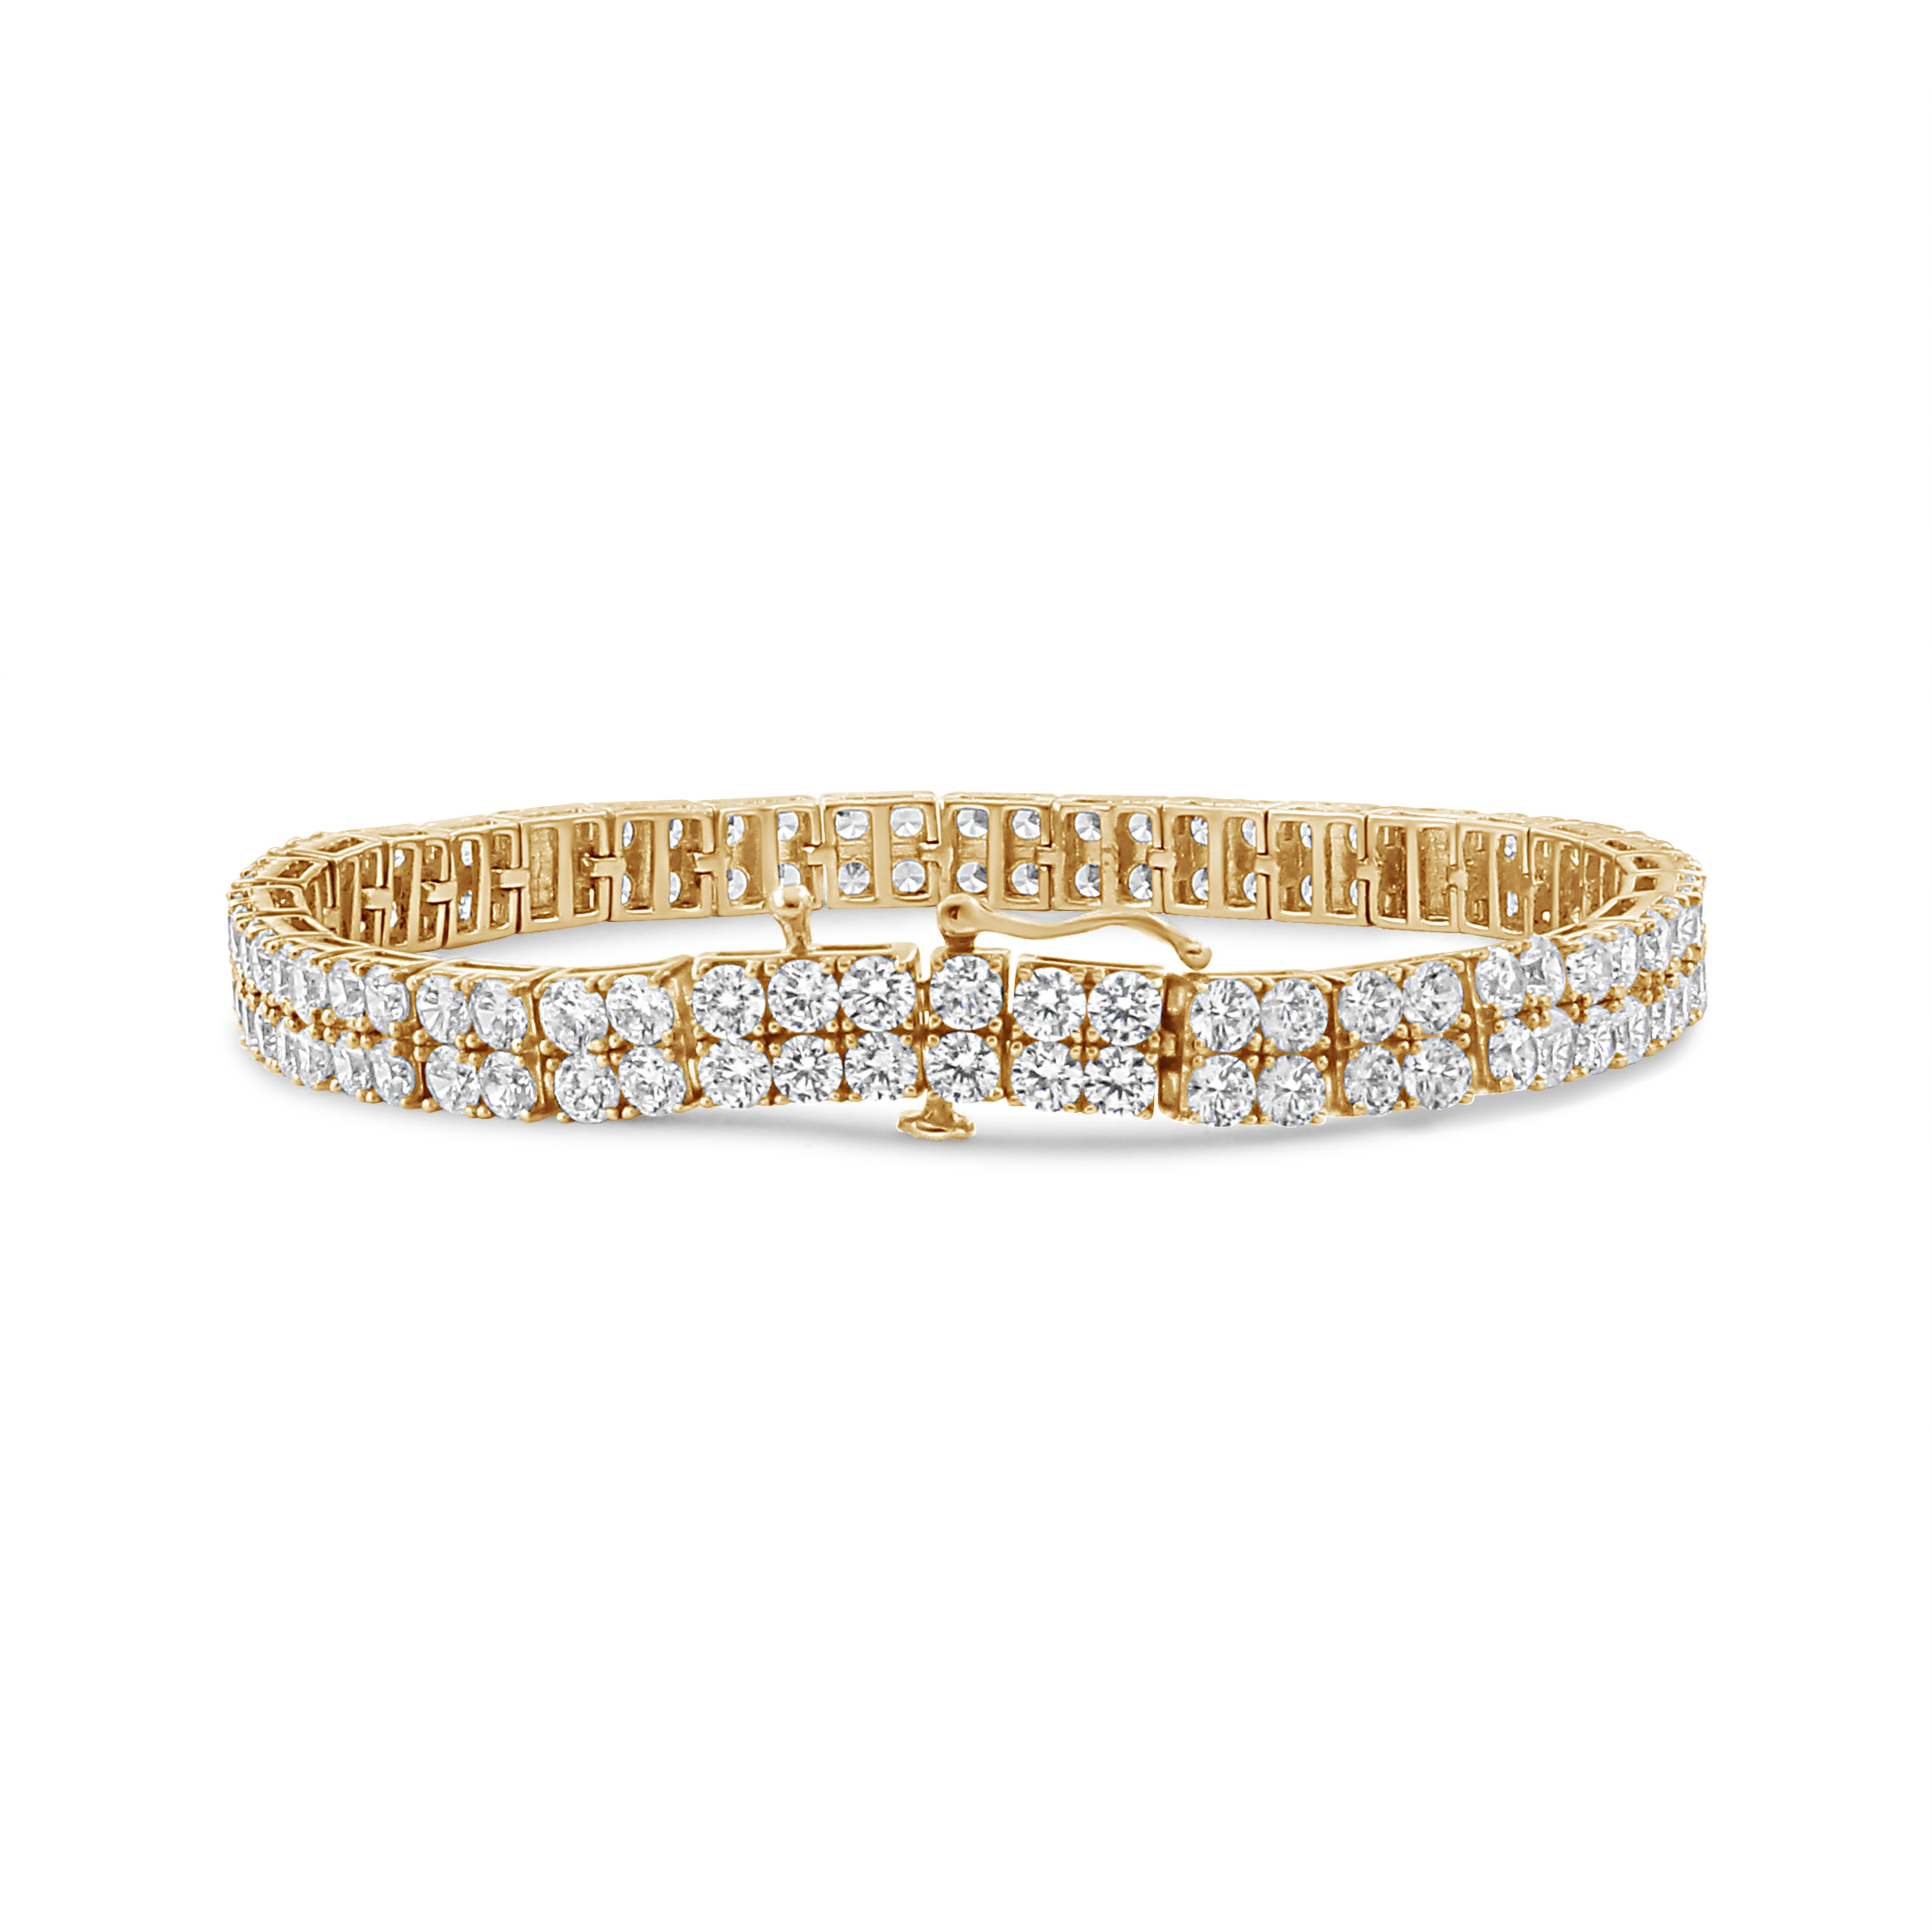 With its double-row brilliance, this 14K yellow gold tennis bracelet is a symphony of sparkle and sophistication. Each round, brilliant-cut diamond is meticulously set within a four-prong embrace, totaling 128 stones that together offer an